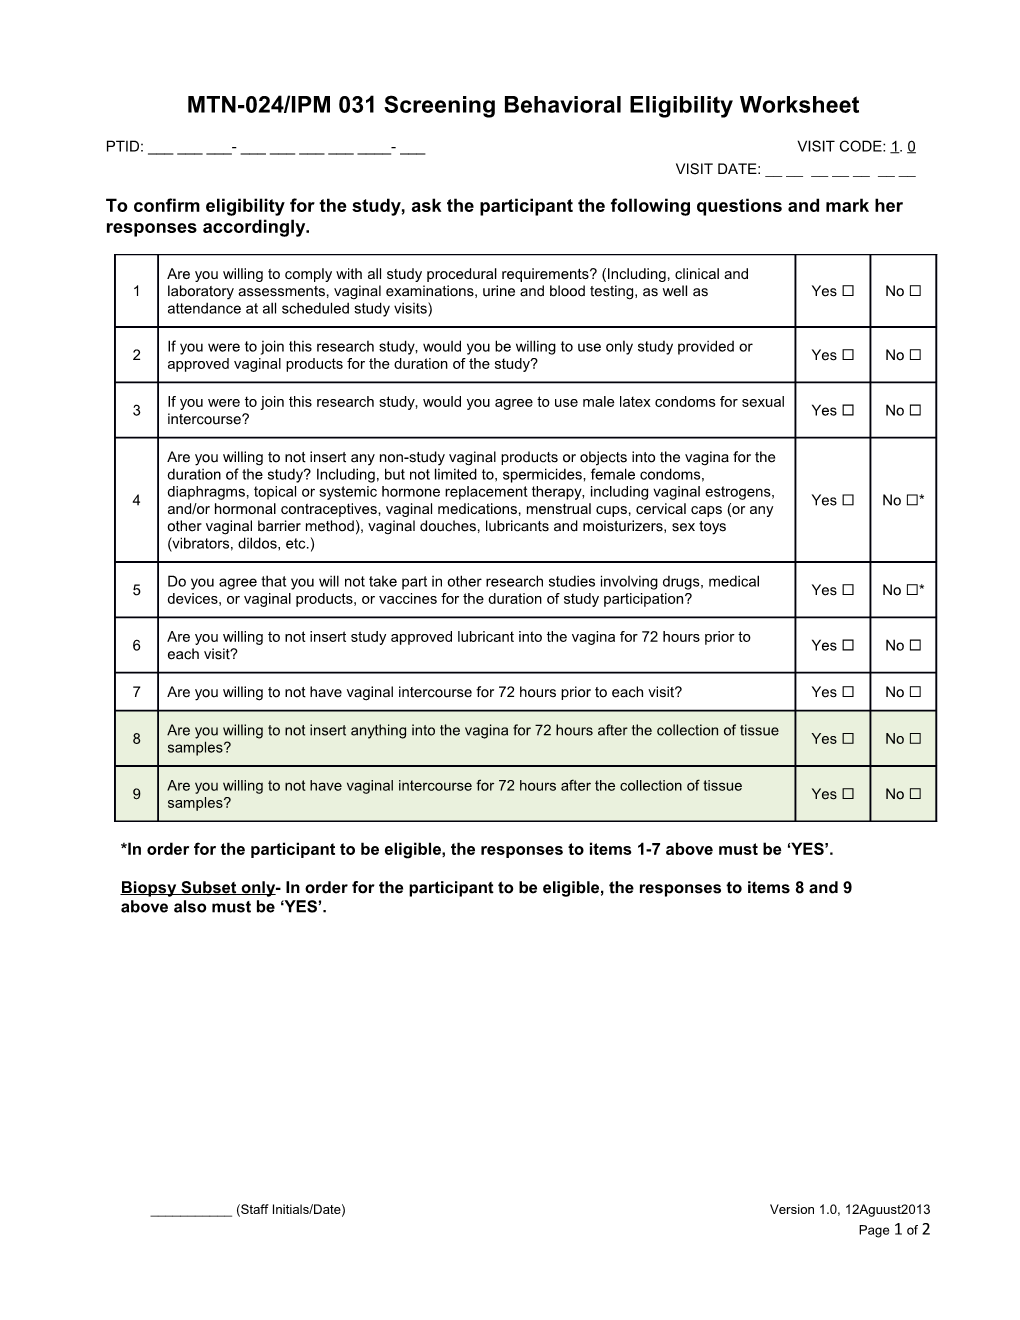 Screening Behavioral Eligibility Worksheet (Page 1 of 2)